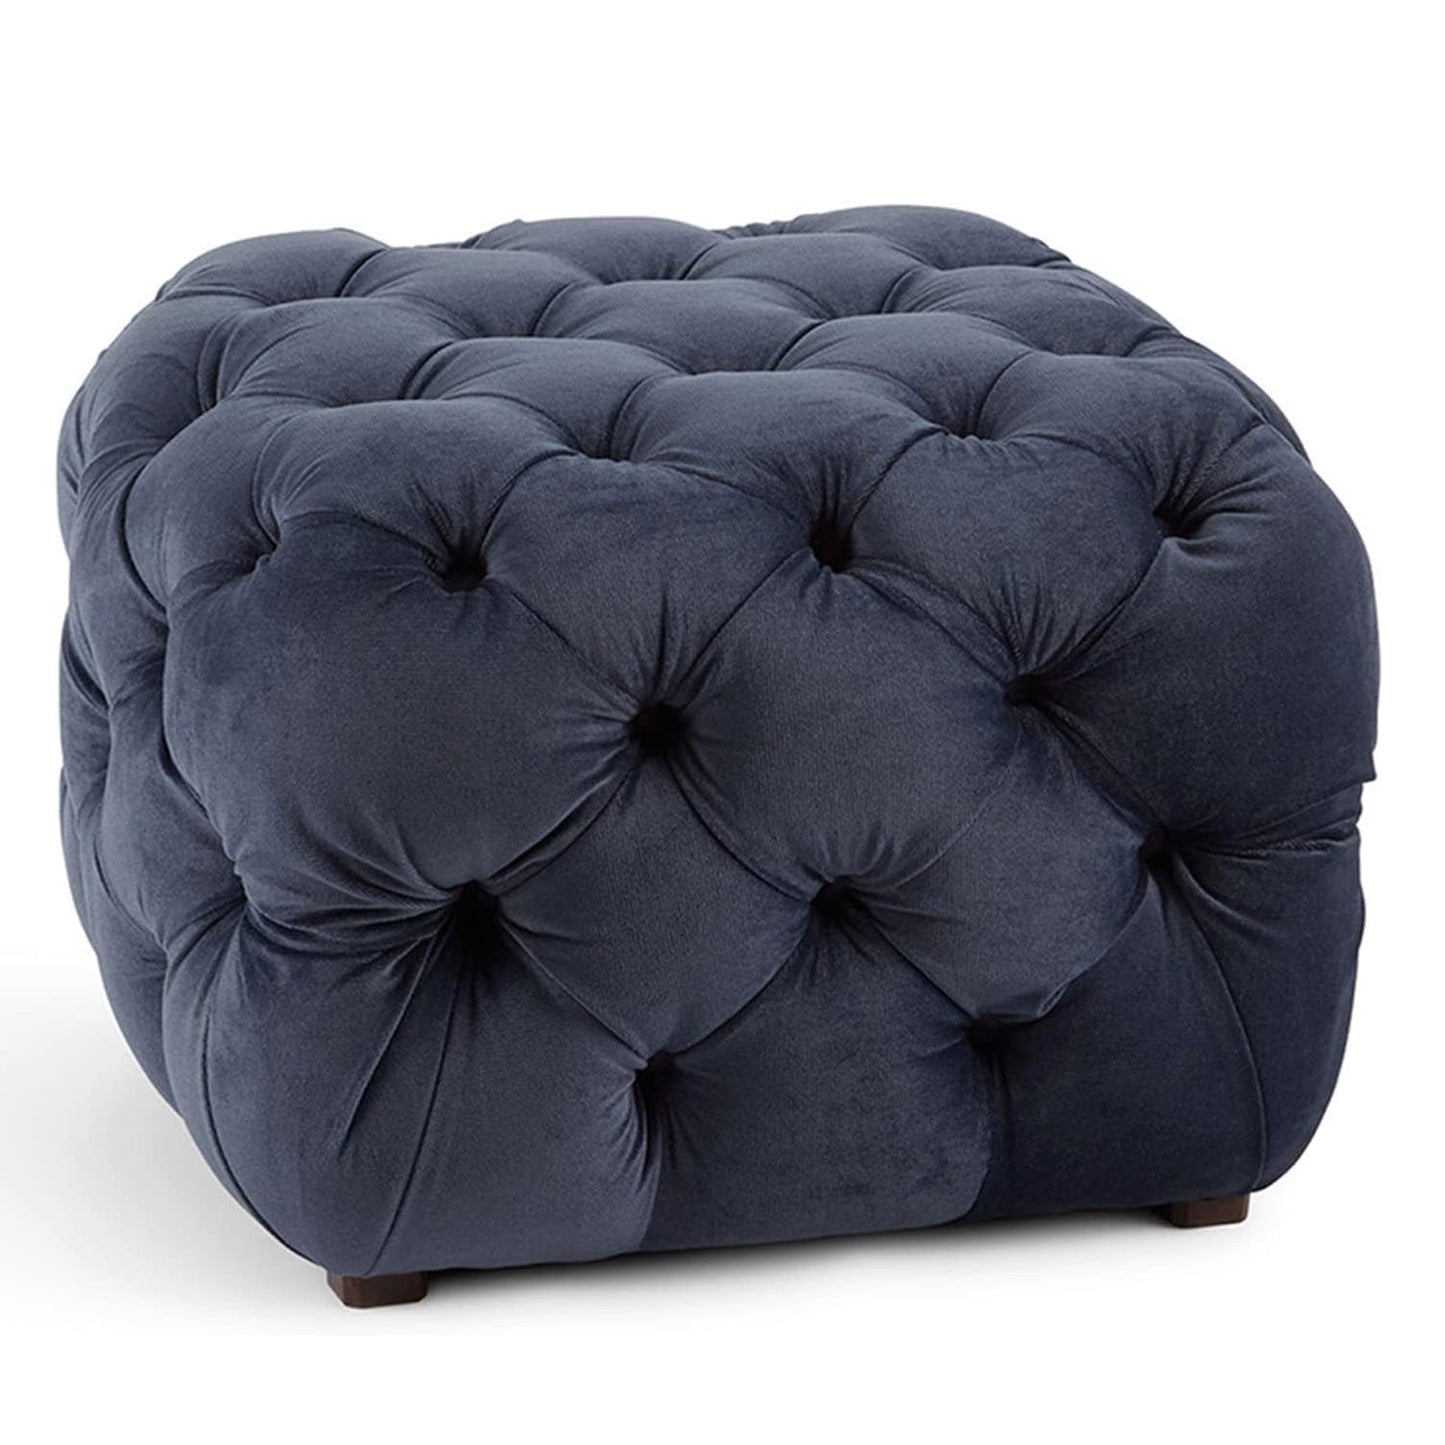 Button Tufted Velvet Cube Ottoman, Upholstered Modern Footrest with Solid Wood Frame